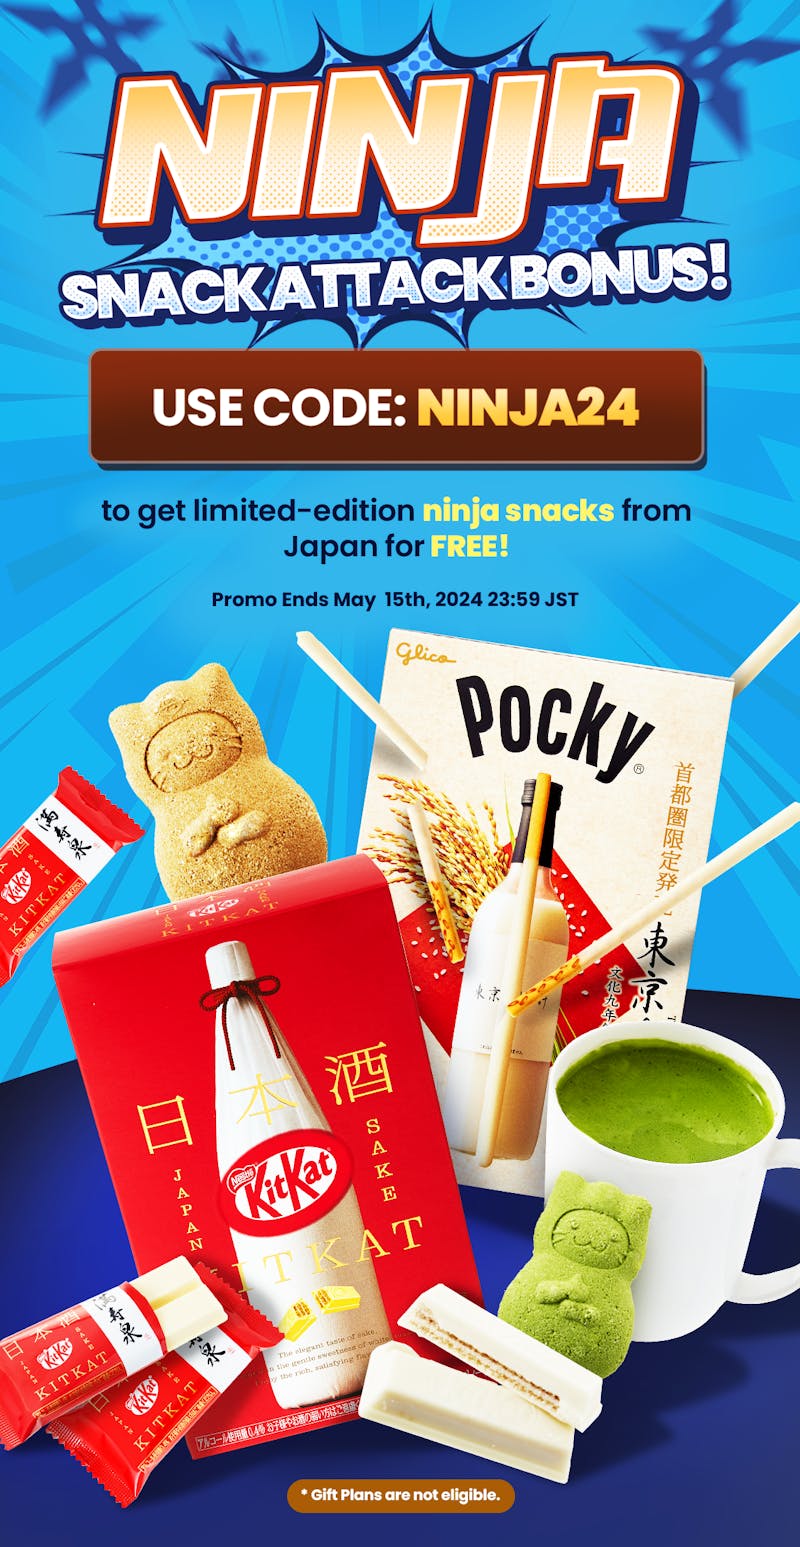 TokyoTreat's Ninja Snack Attack Bonus promotion with featured Japan-exclusive items.